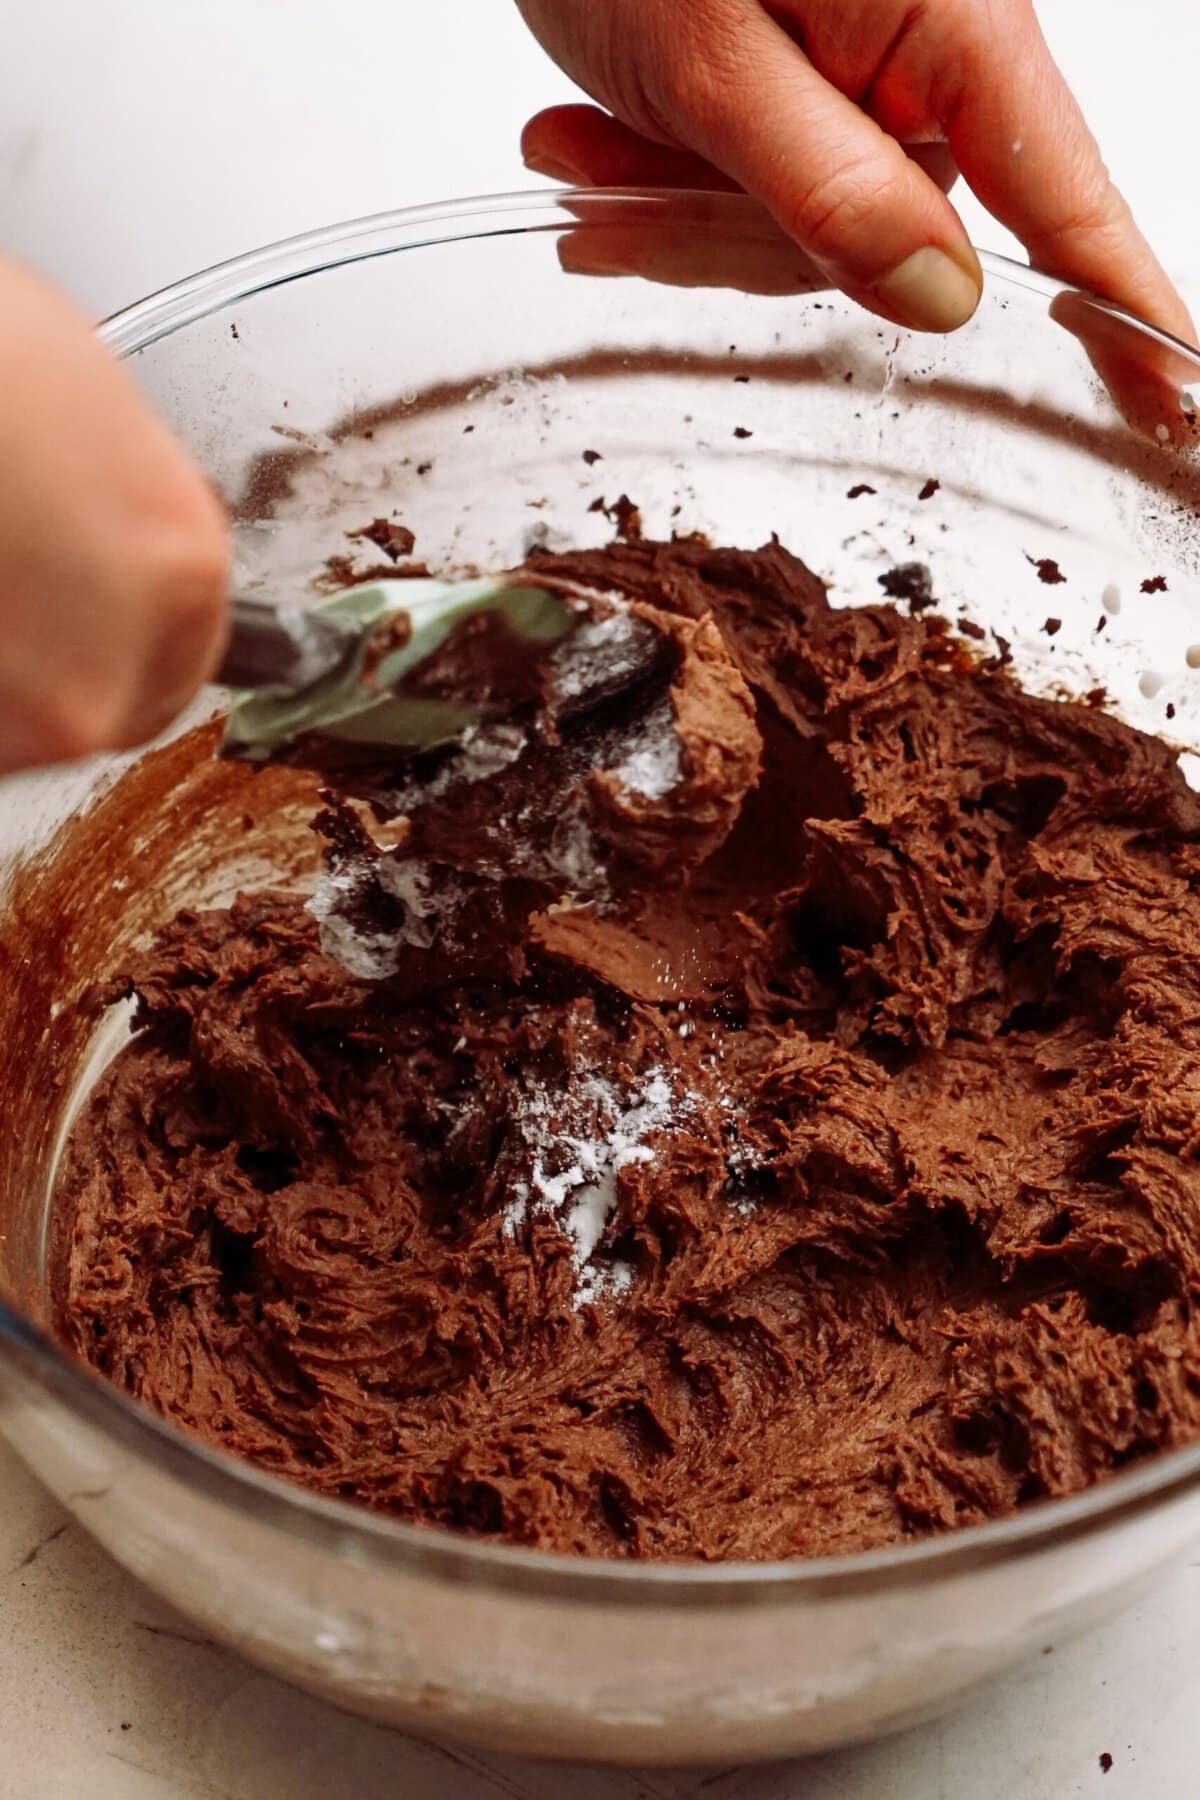 Mixing chocolate batter in a glass bowl.